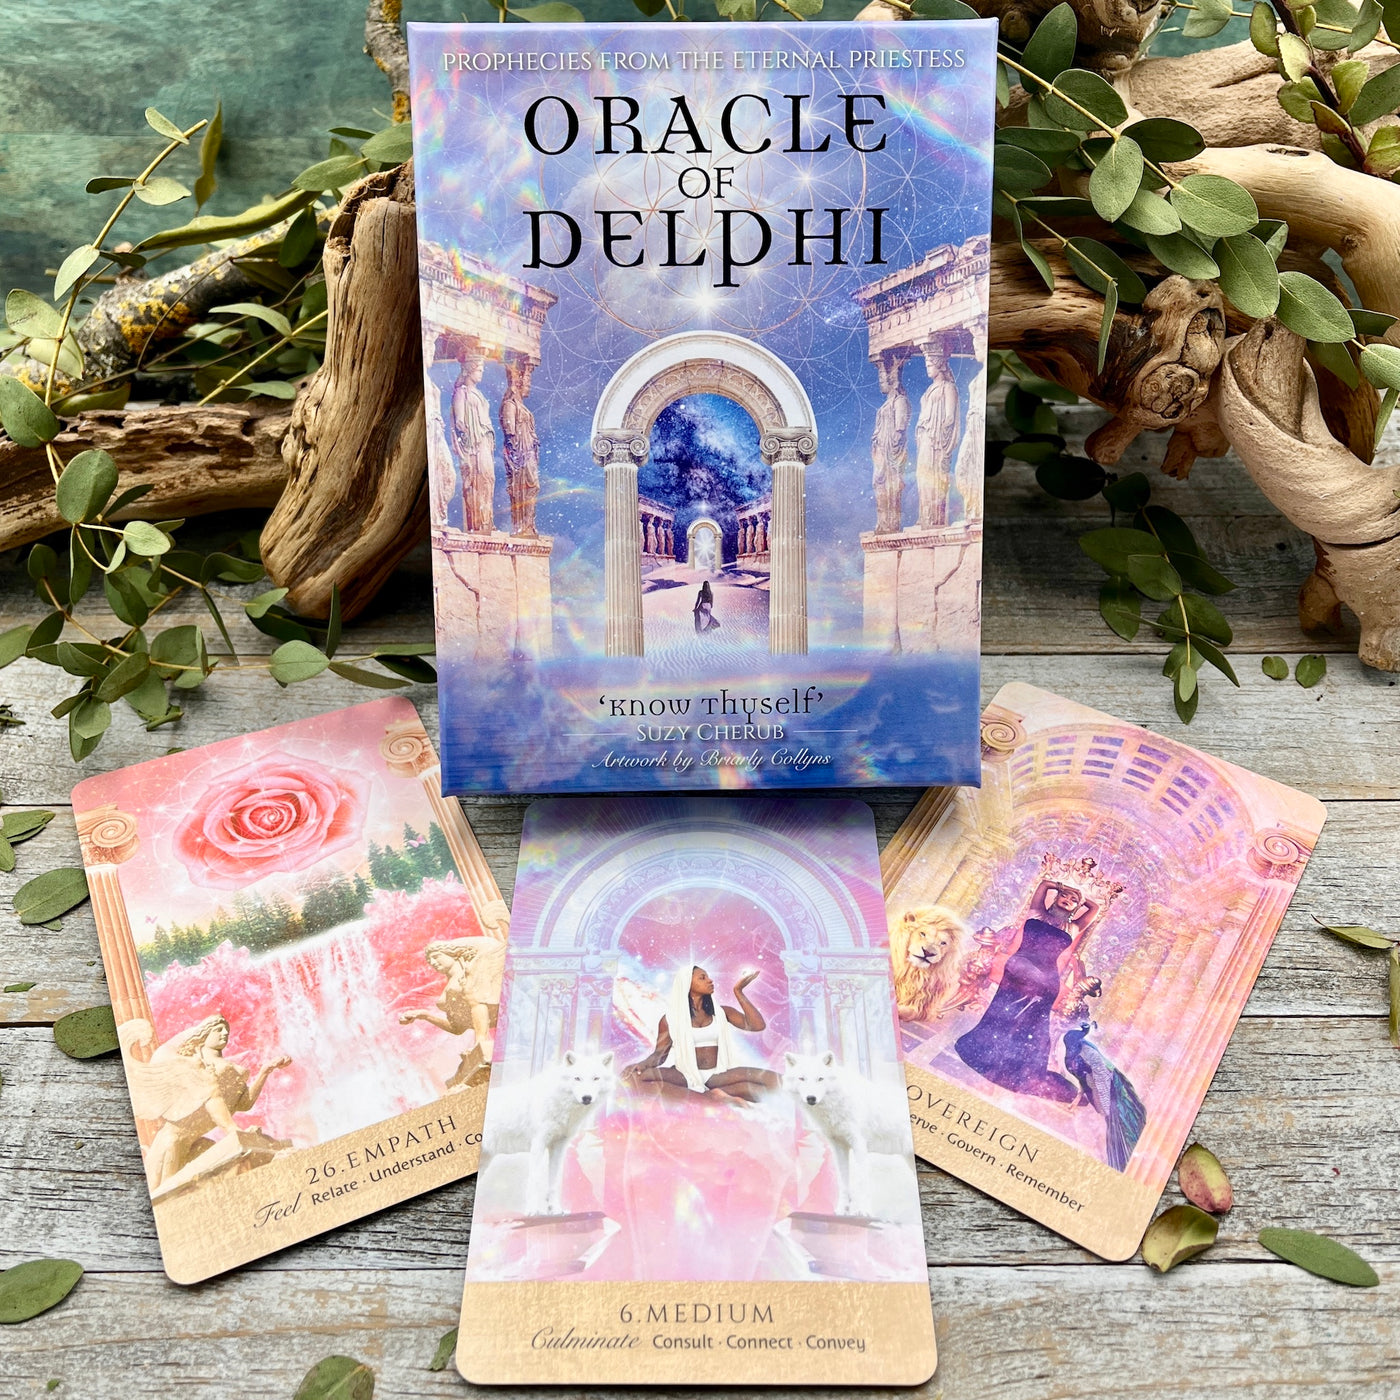 Oracle of Delphi: Prophecies from the Eternal Priestess